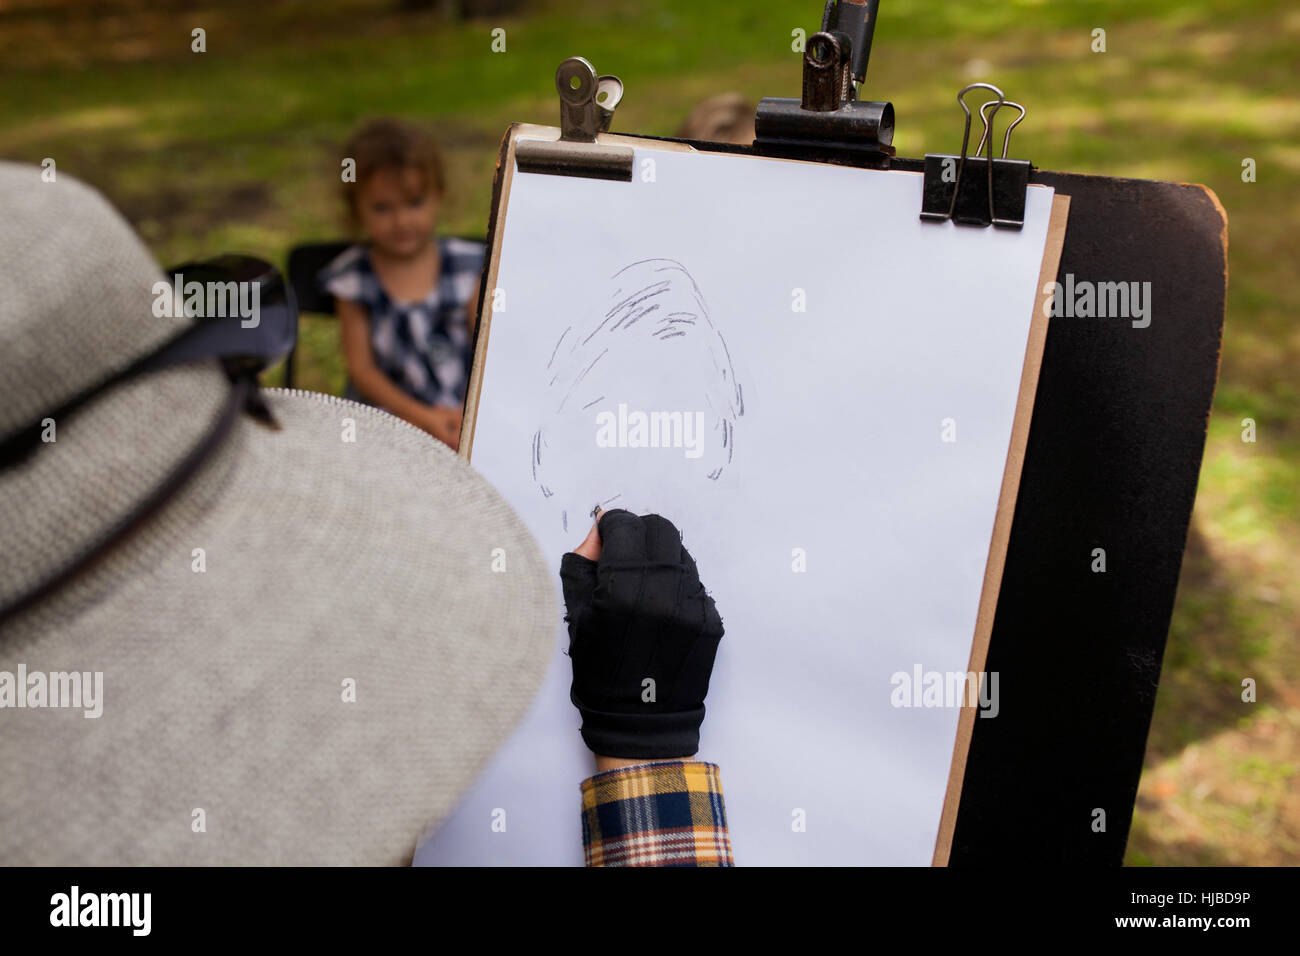 Woman sketching portrait of little girl in background Stock Photo